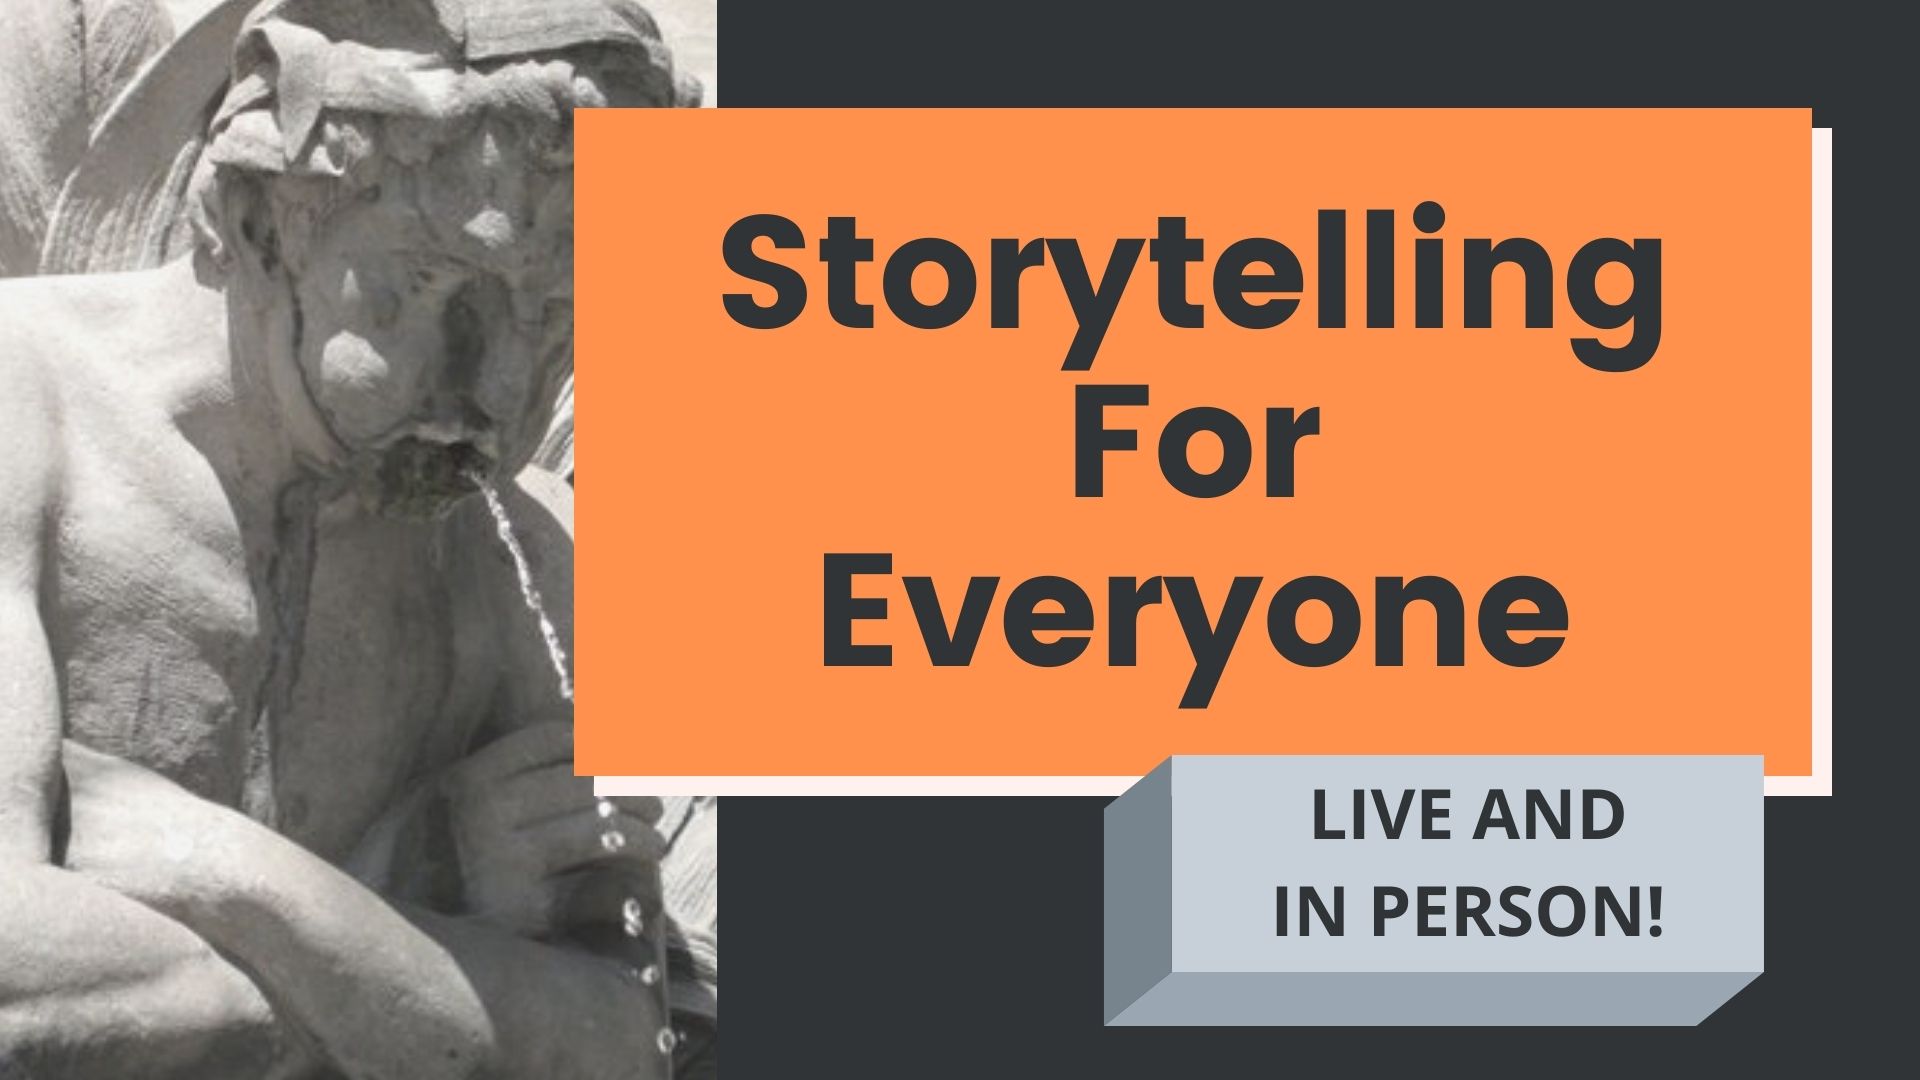 Storytelling For Everyone: Four Week Course in Personal Narrative (Mondays in February)